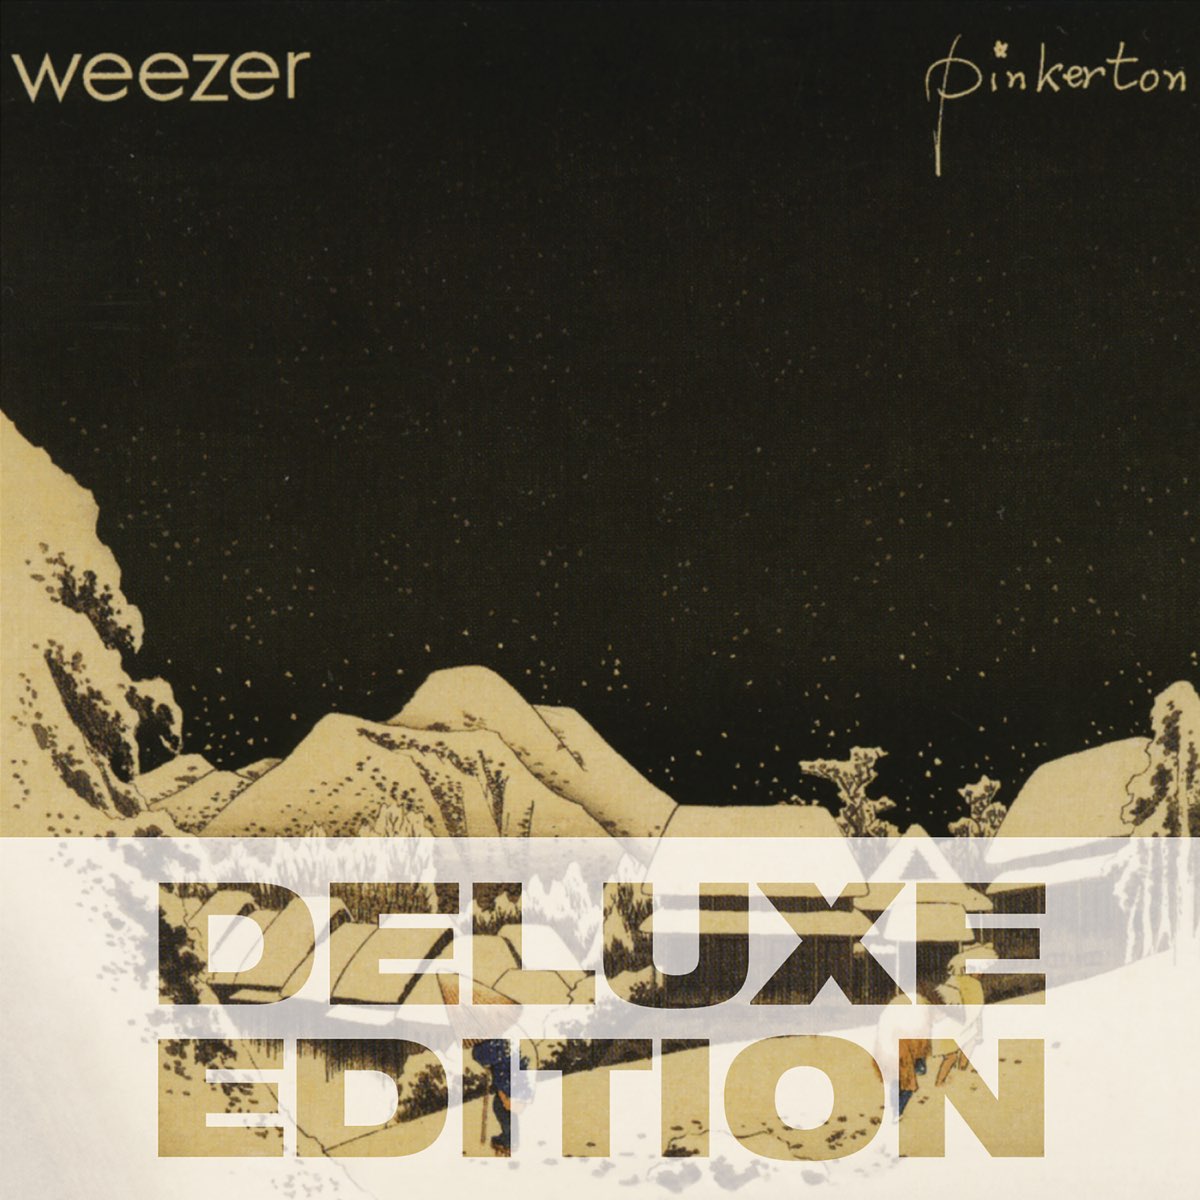 "Pinkerton: Deluxe Edition" by Weezer album cover